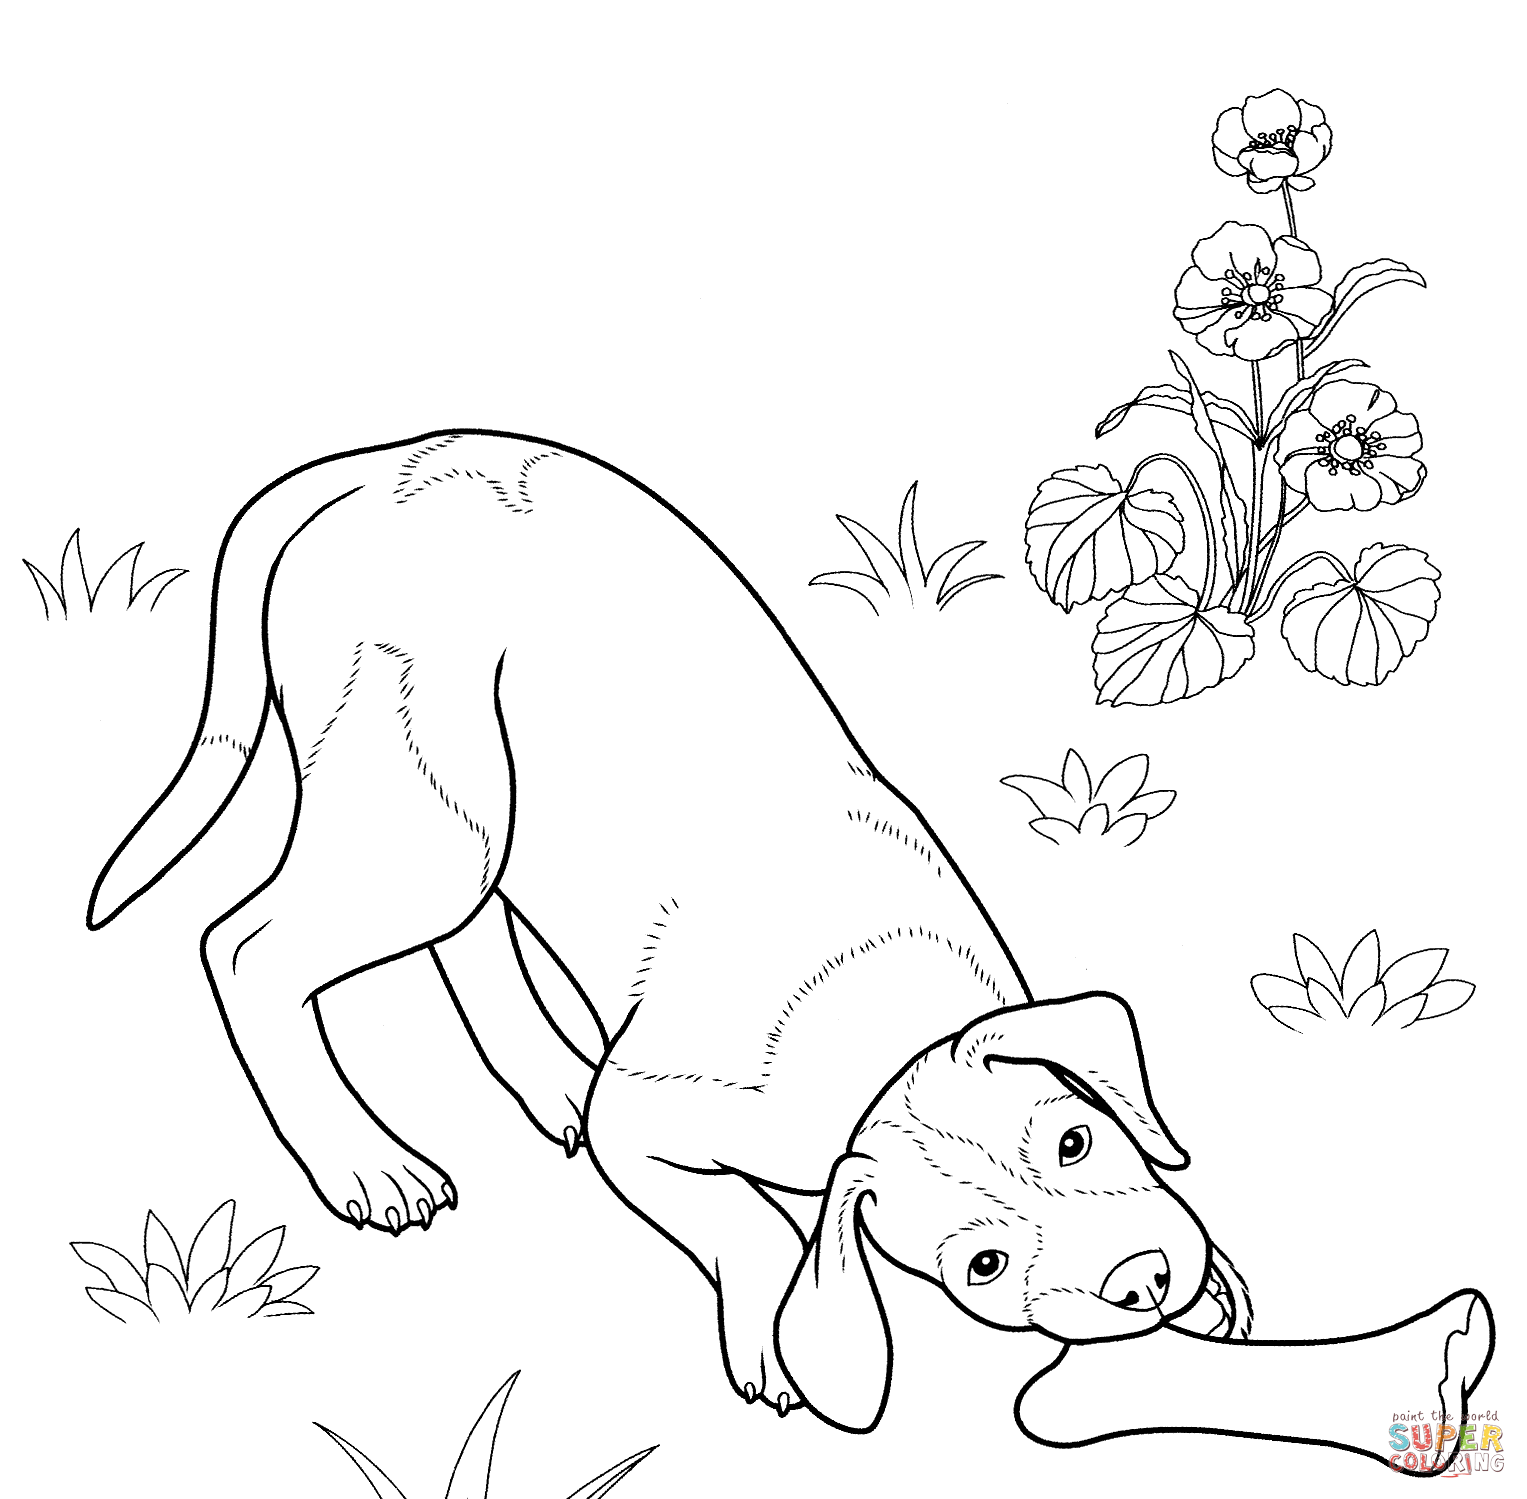 German Shepherd Dogs coloring page | Free Printable Coloring Pages